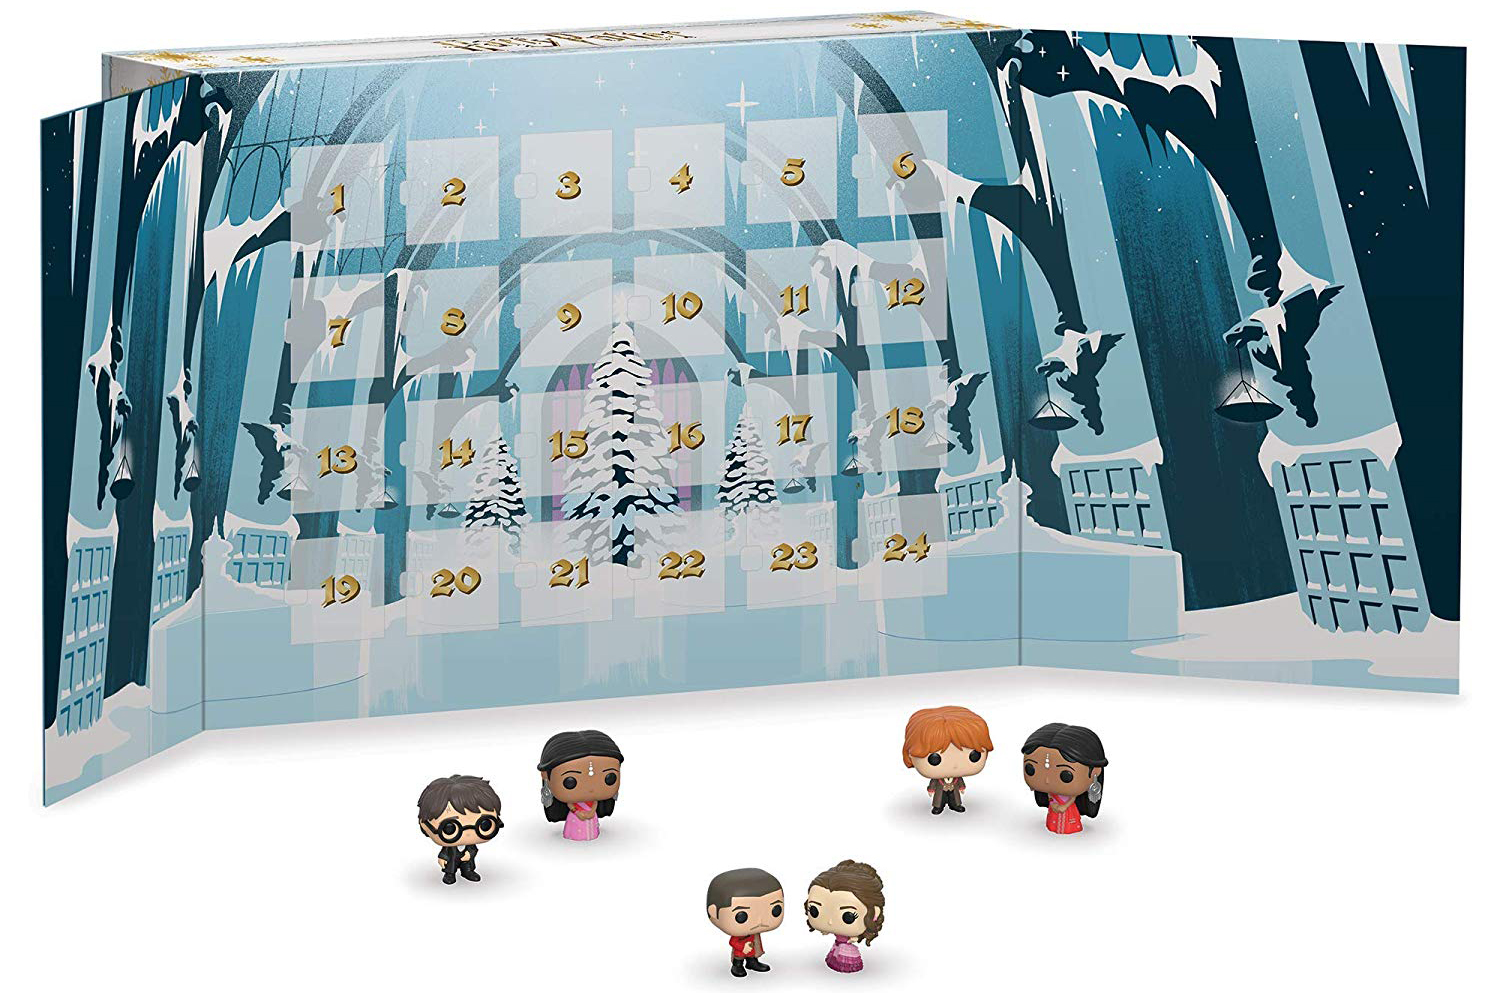 New Funko POP Harry Potter Advent Calendar 2019 Limited Edition with 24 figures is for preoder, and sale YouLoveIt.com